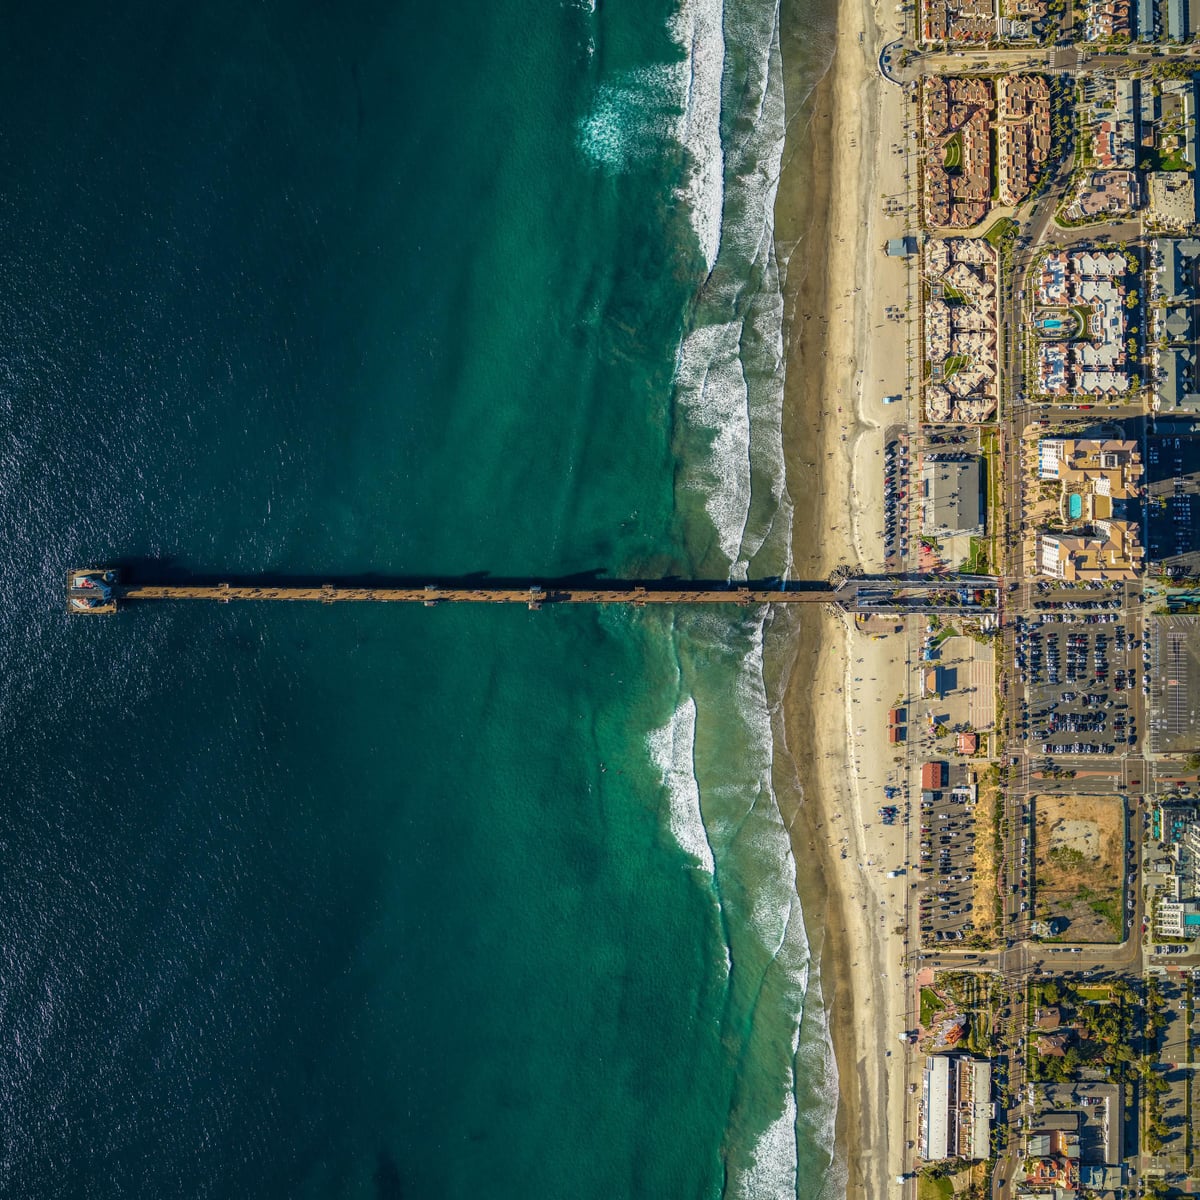 pier-in-southern-california-photo-by-mitch-rouse.jpg